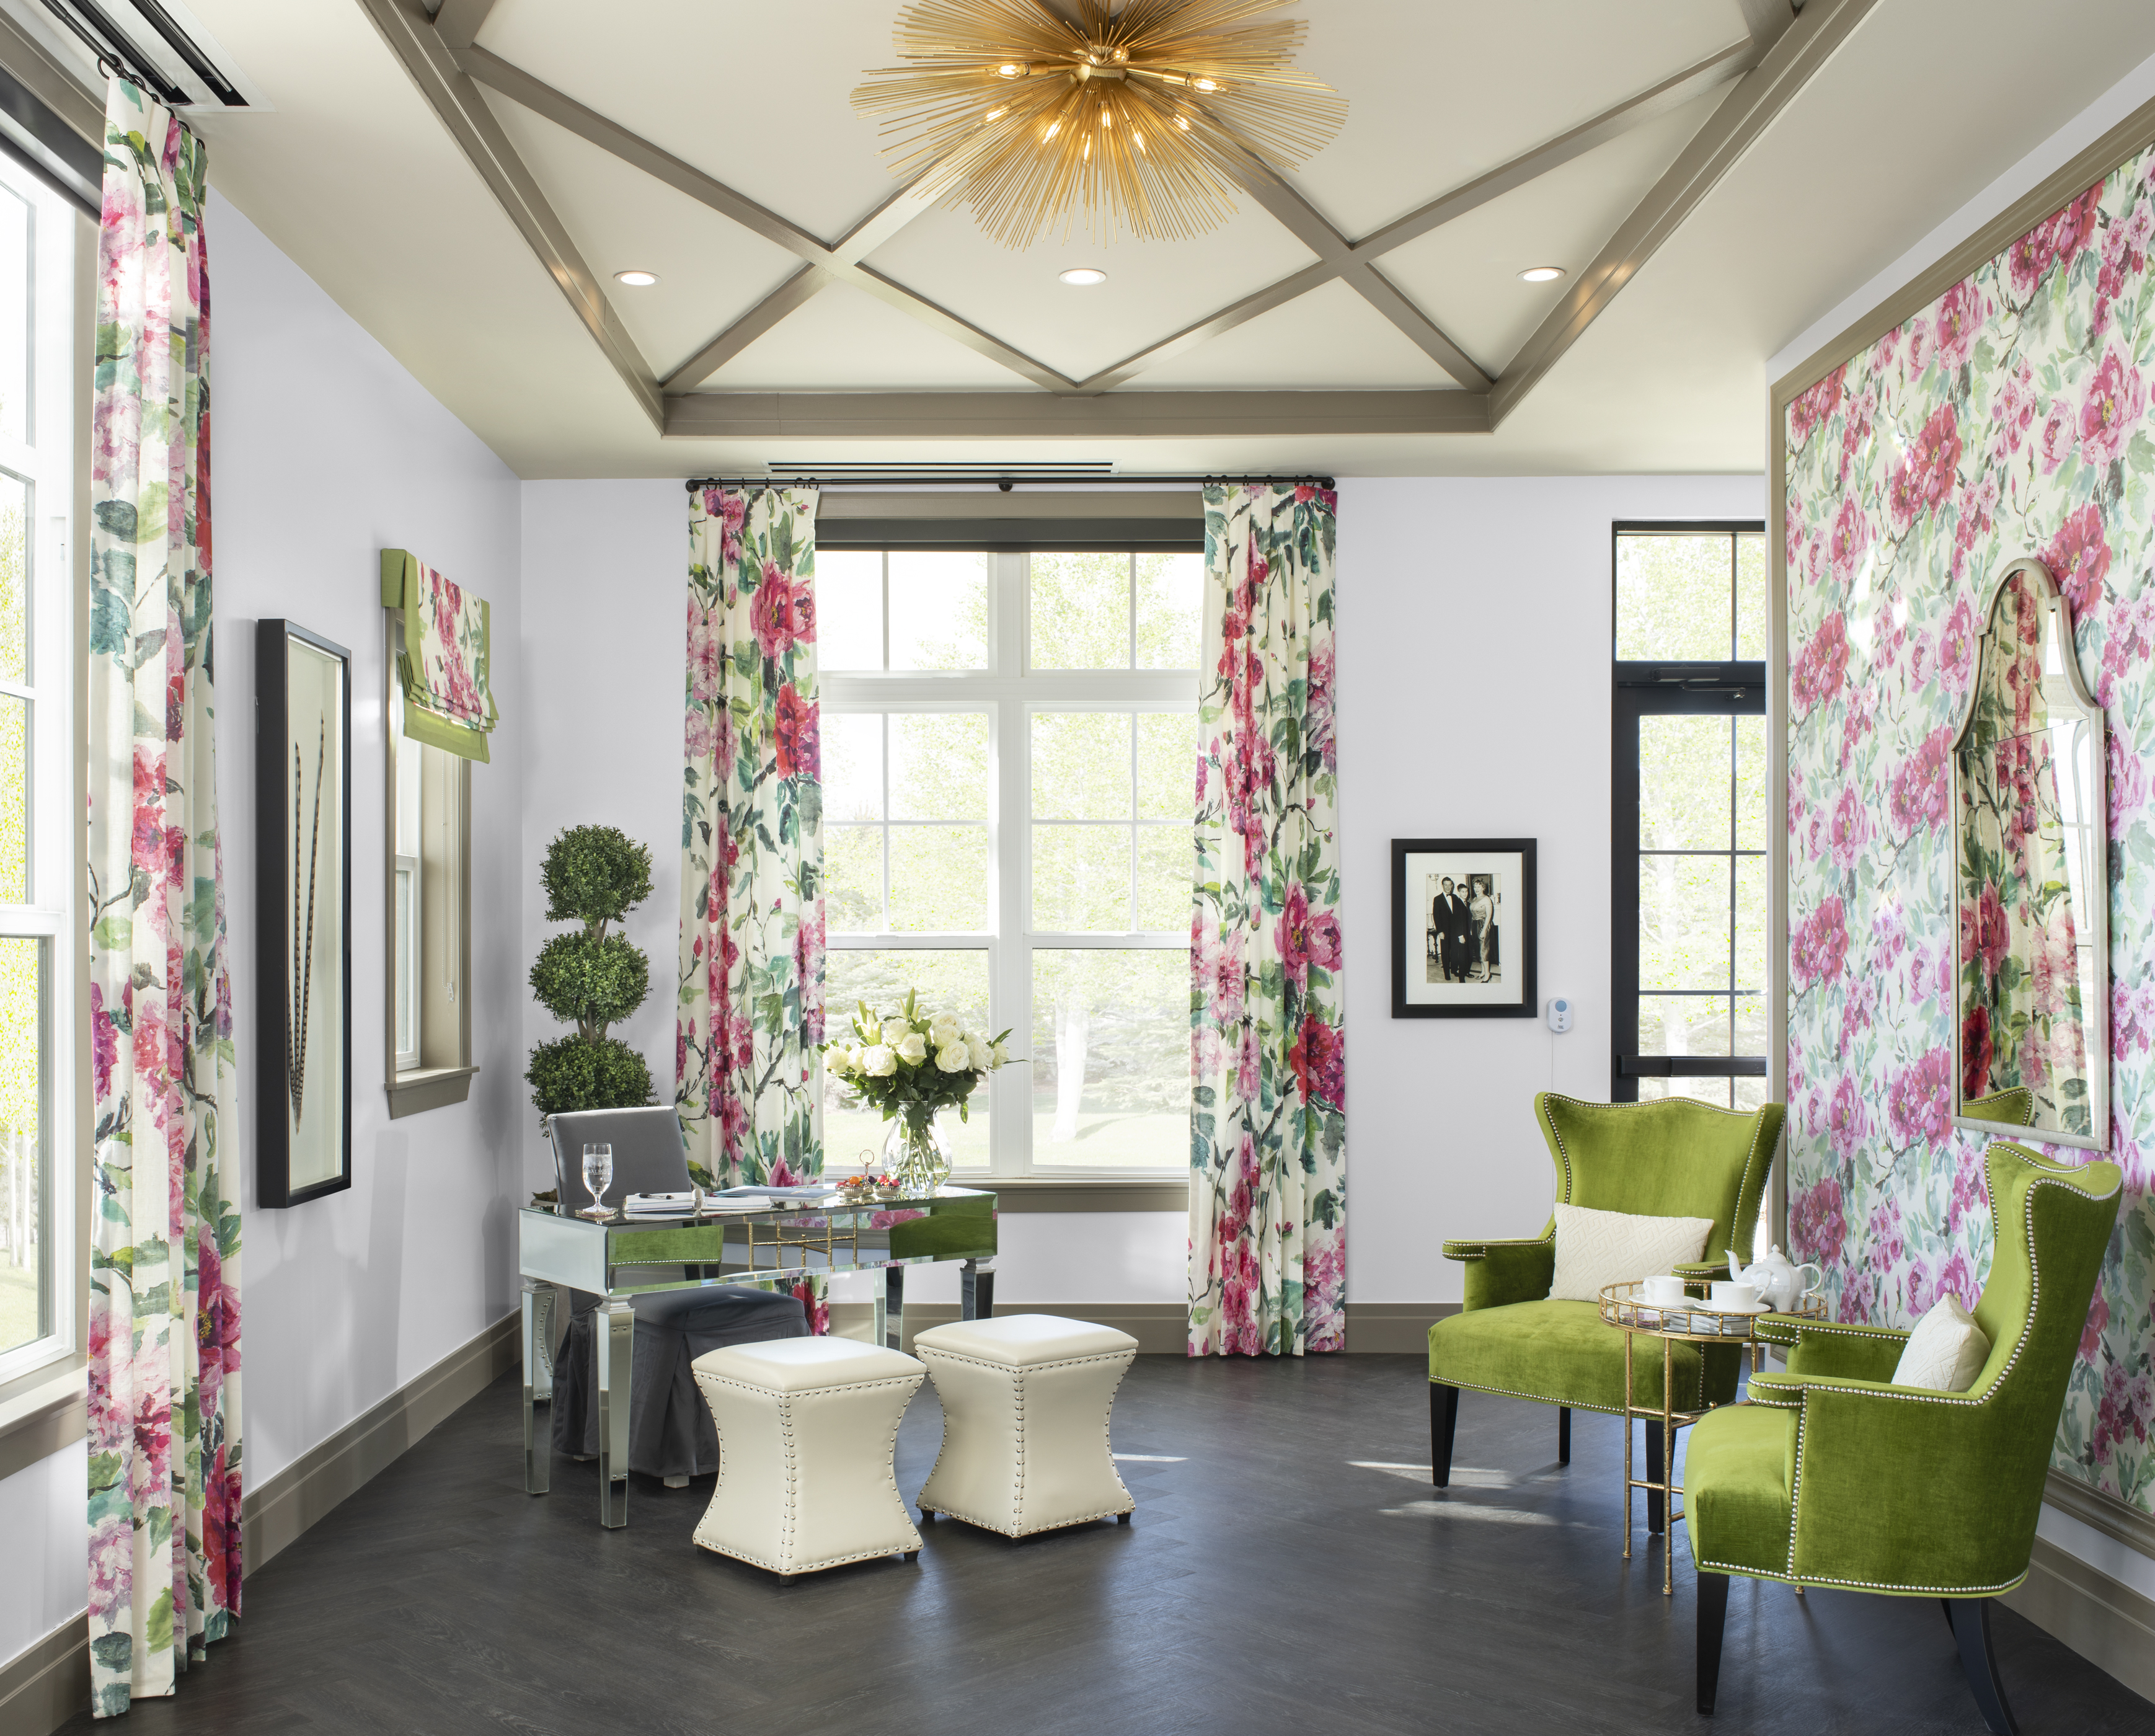 Colorful floral interiors